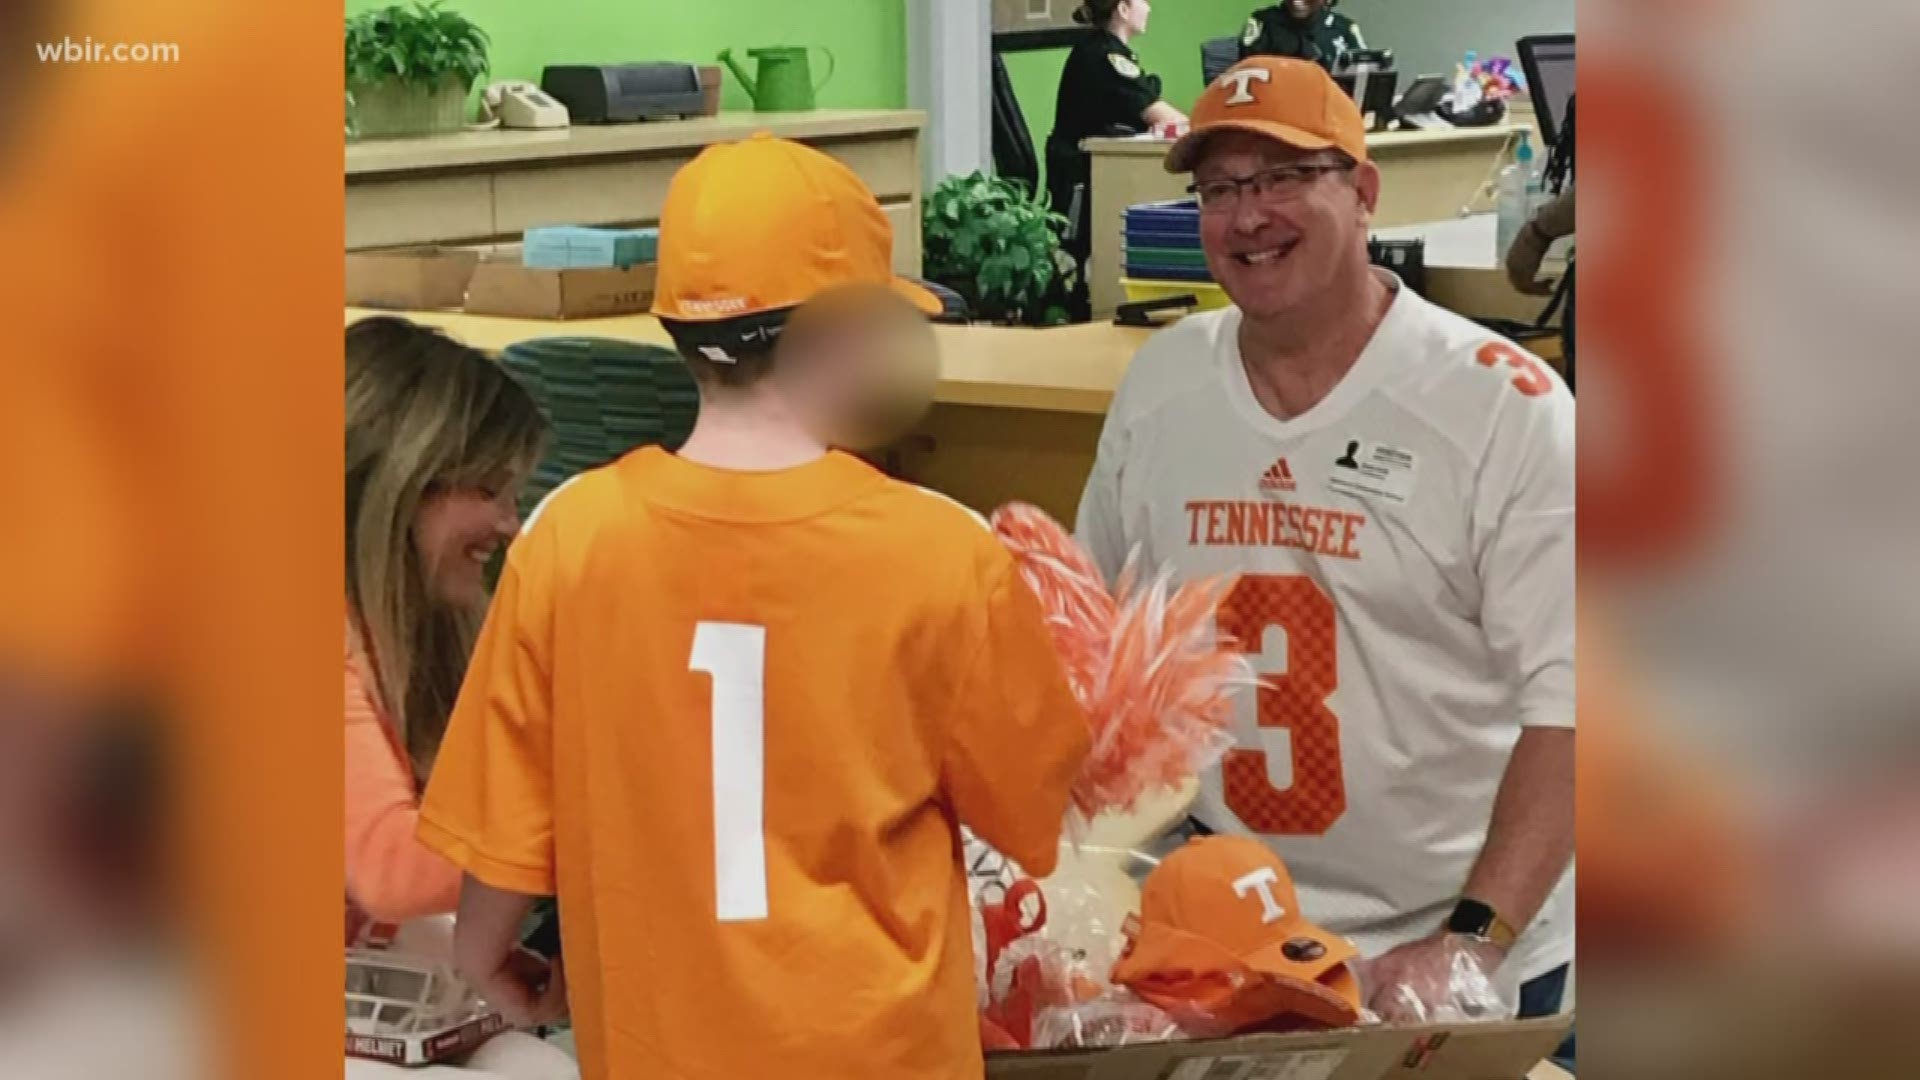 It's a story that showed the true Volunteer spirit. The VolShop even got the green light to sell the boy's shirt, with proceeds going to an organization fighting bullying.